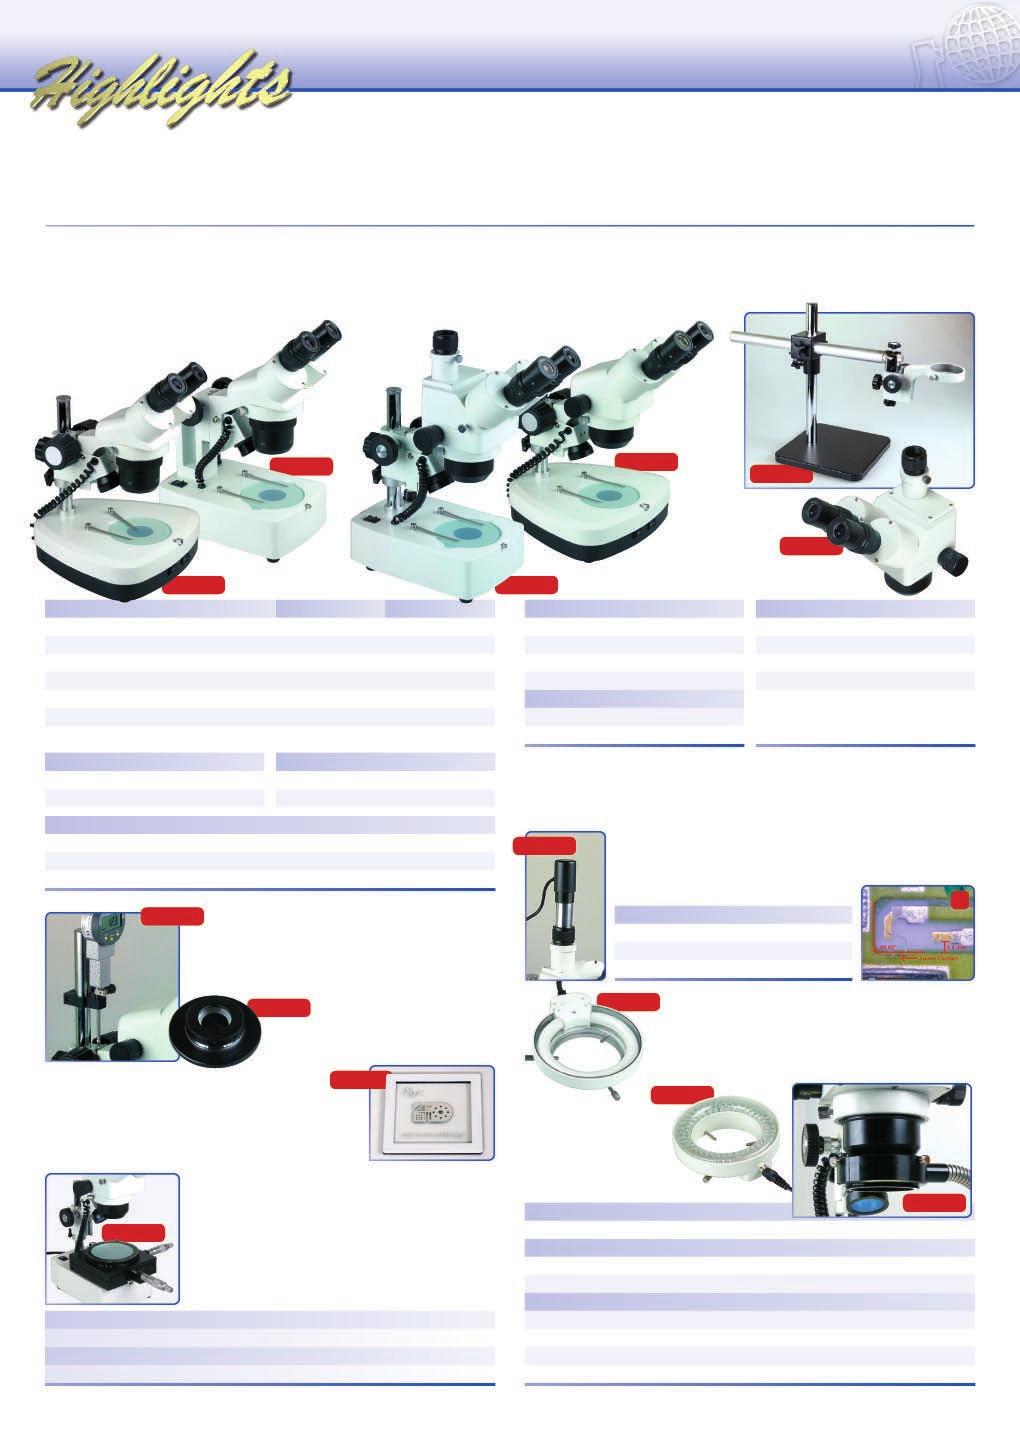 Stereo microscopes SSM stereo microscopes All models are supplied with eyepieces 10x. Models with illumination: switchable incident light or Diopter adjustment: ± 5 dp.